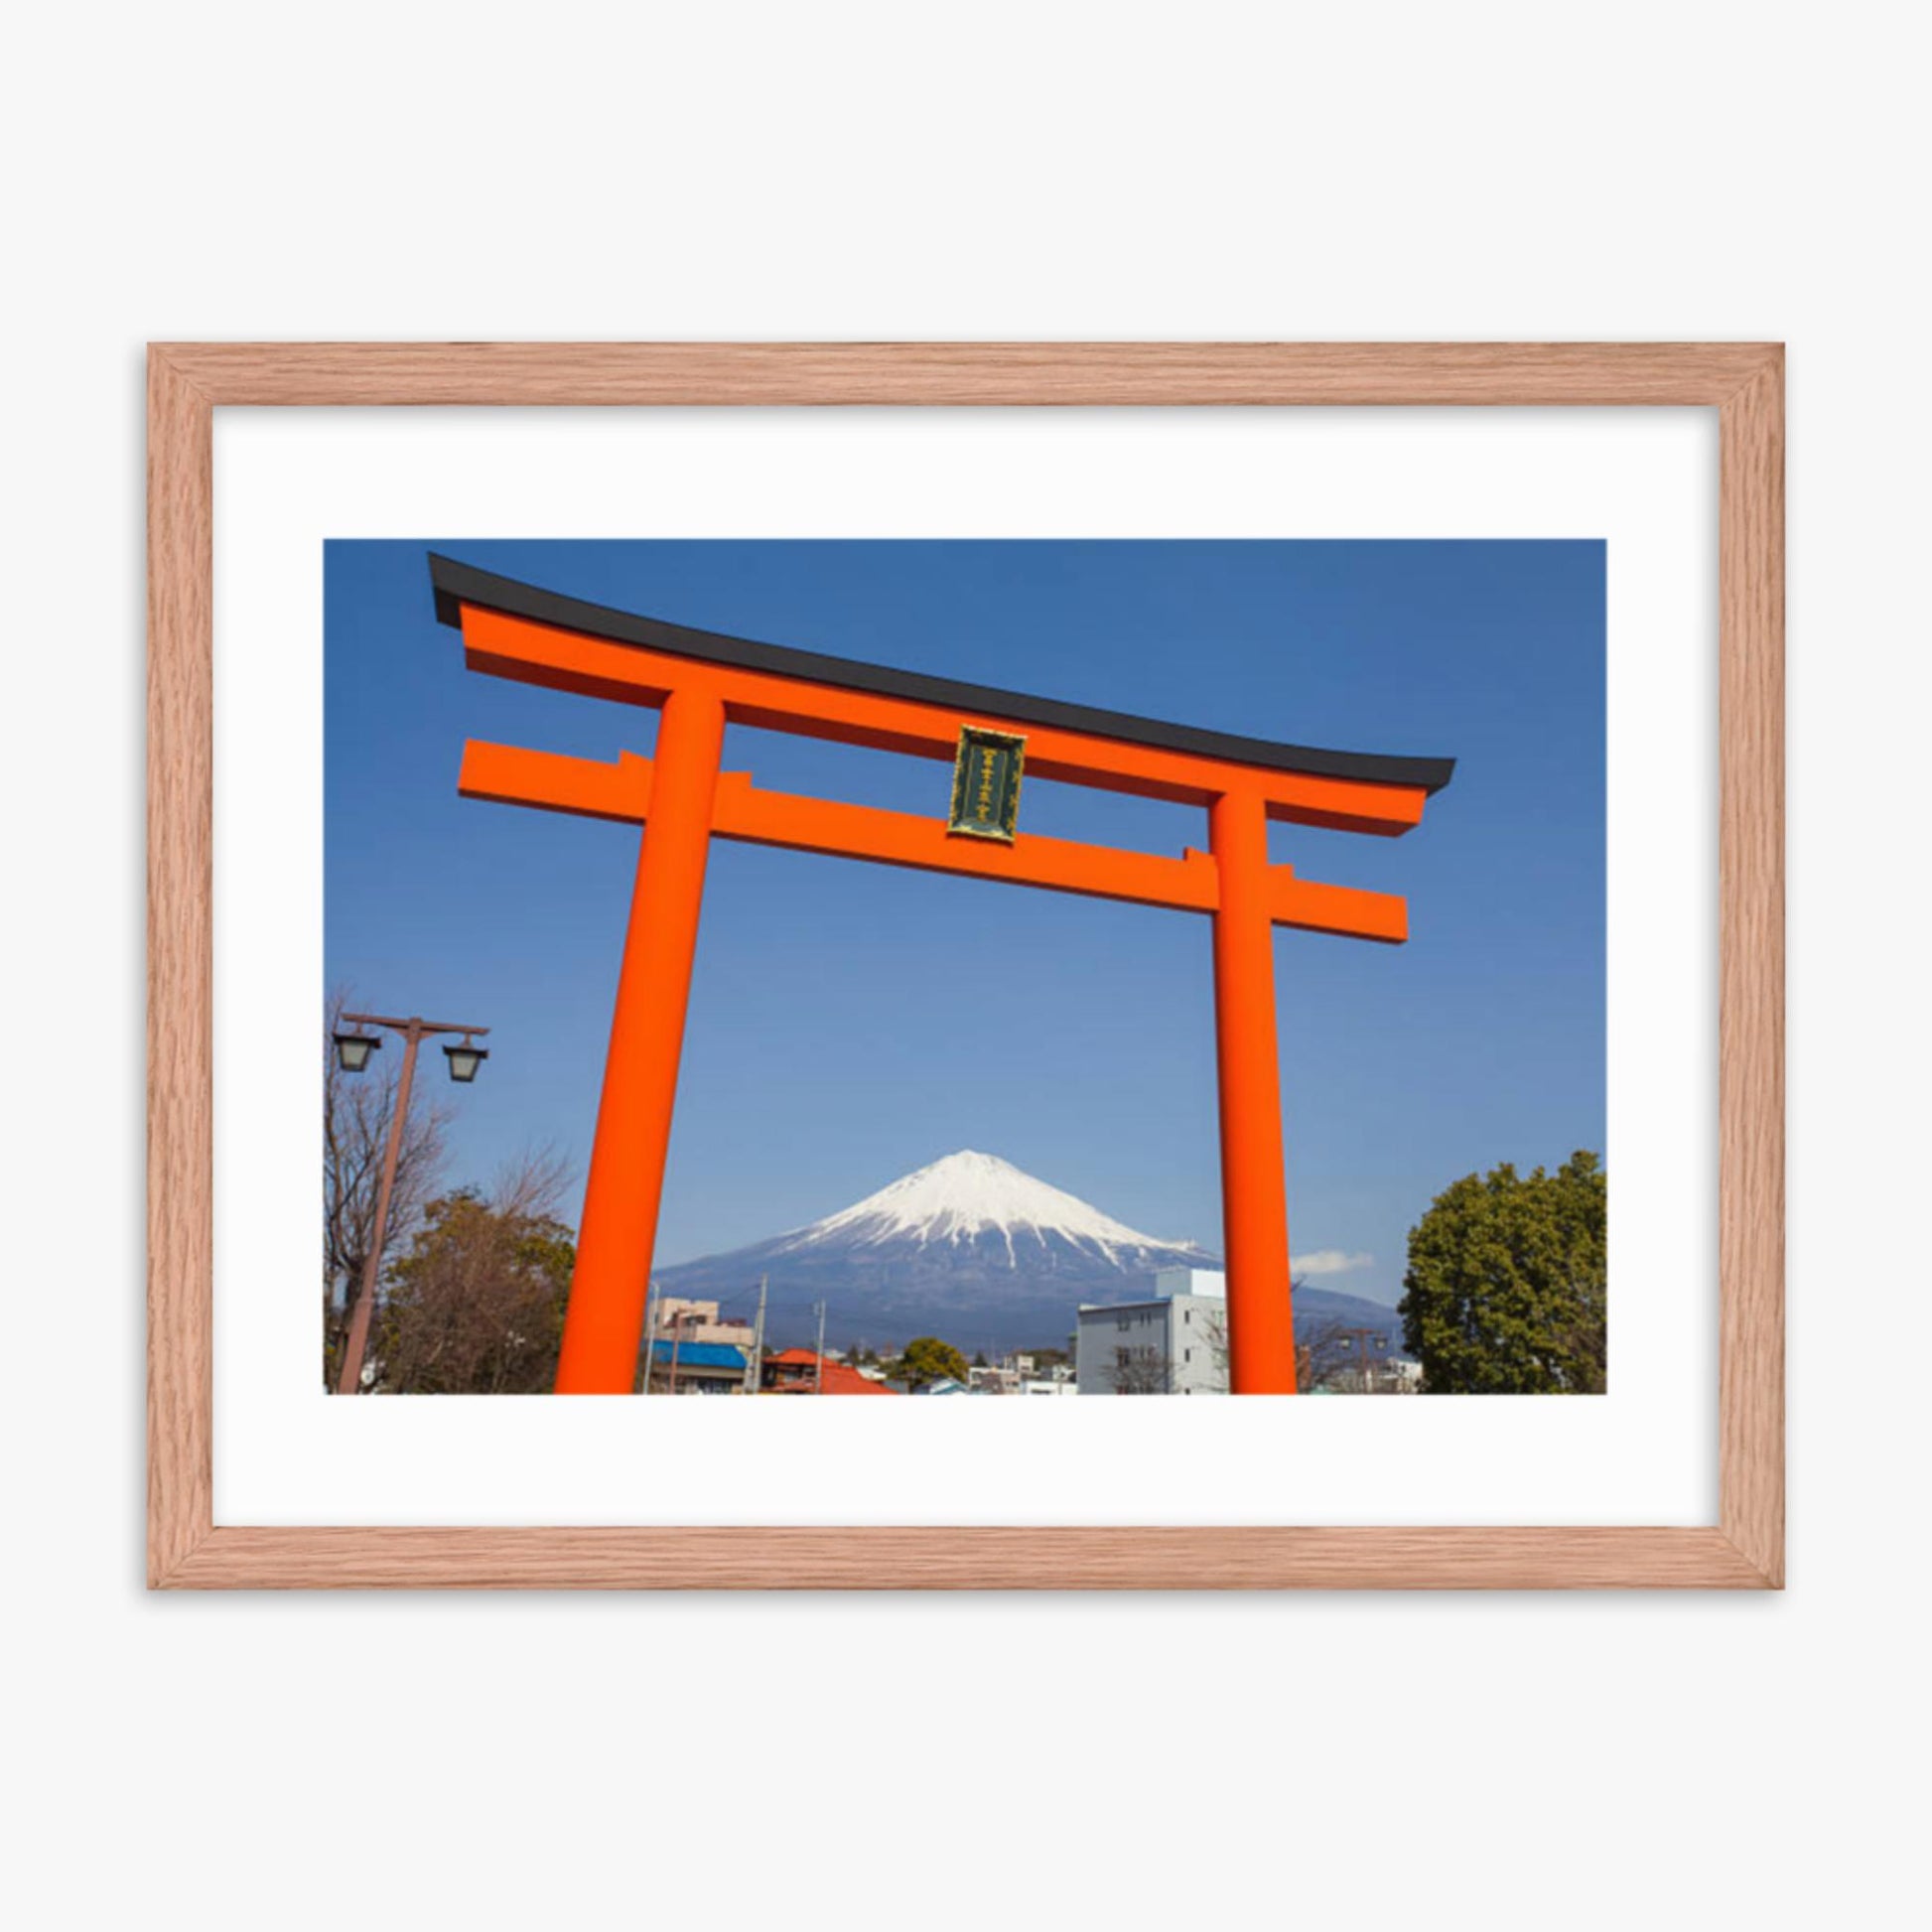 Mount Fuji 18x24 in Poster With Oak Frame